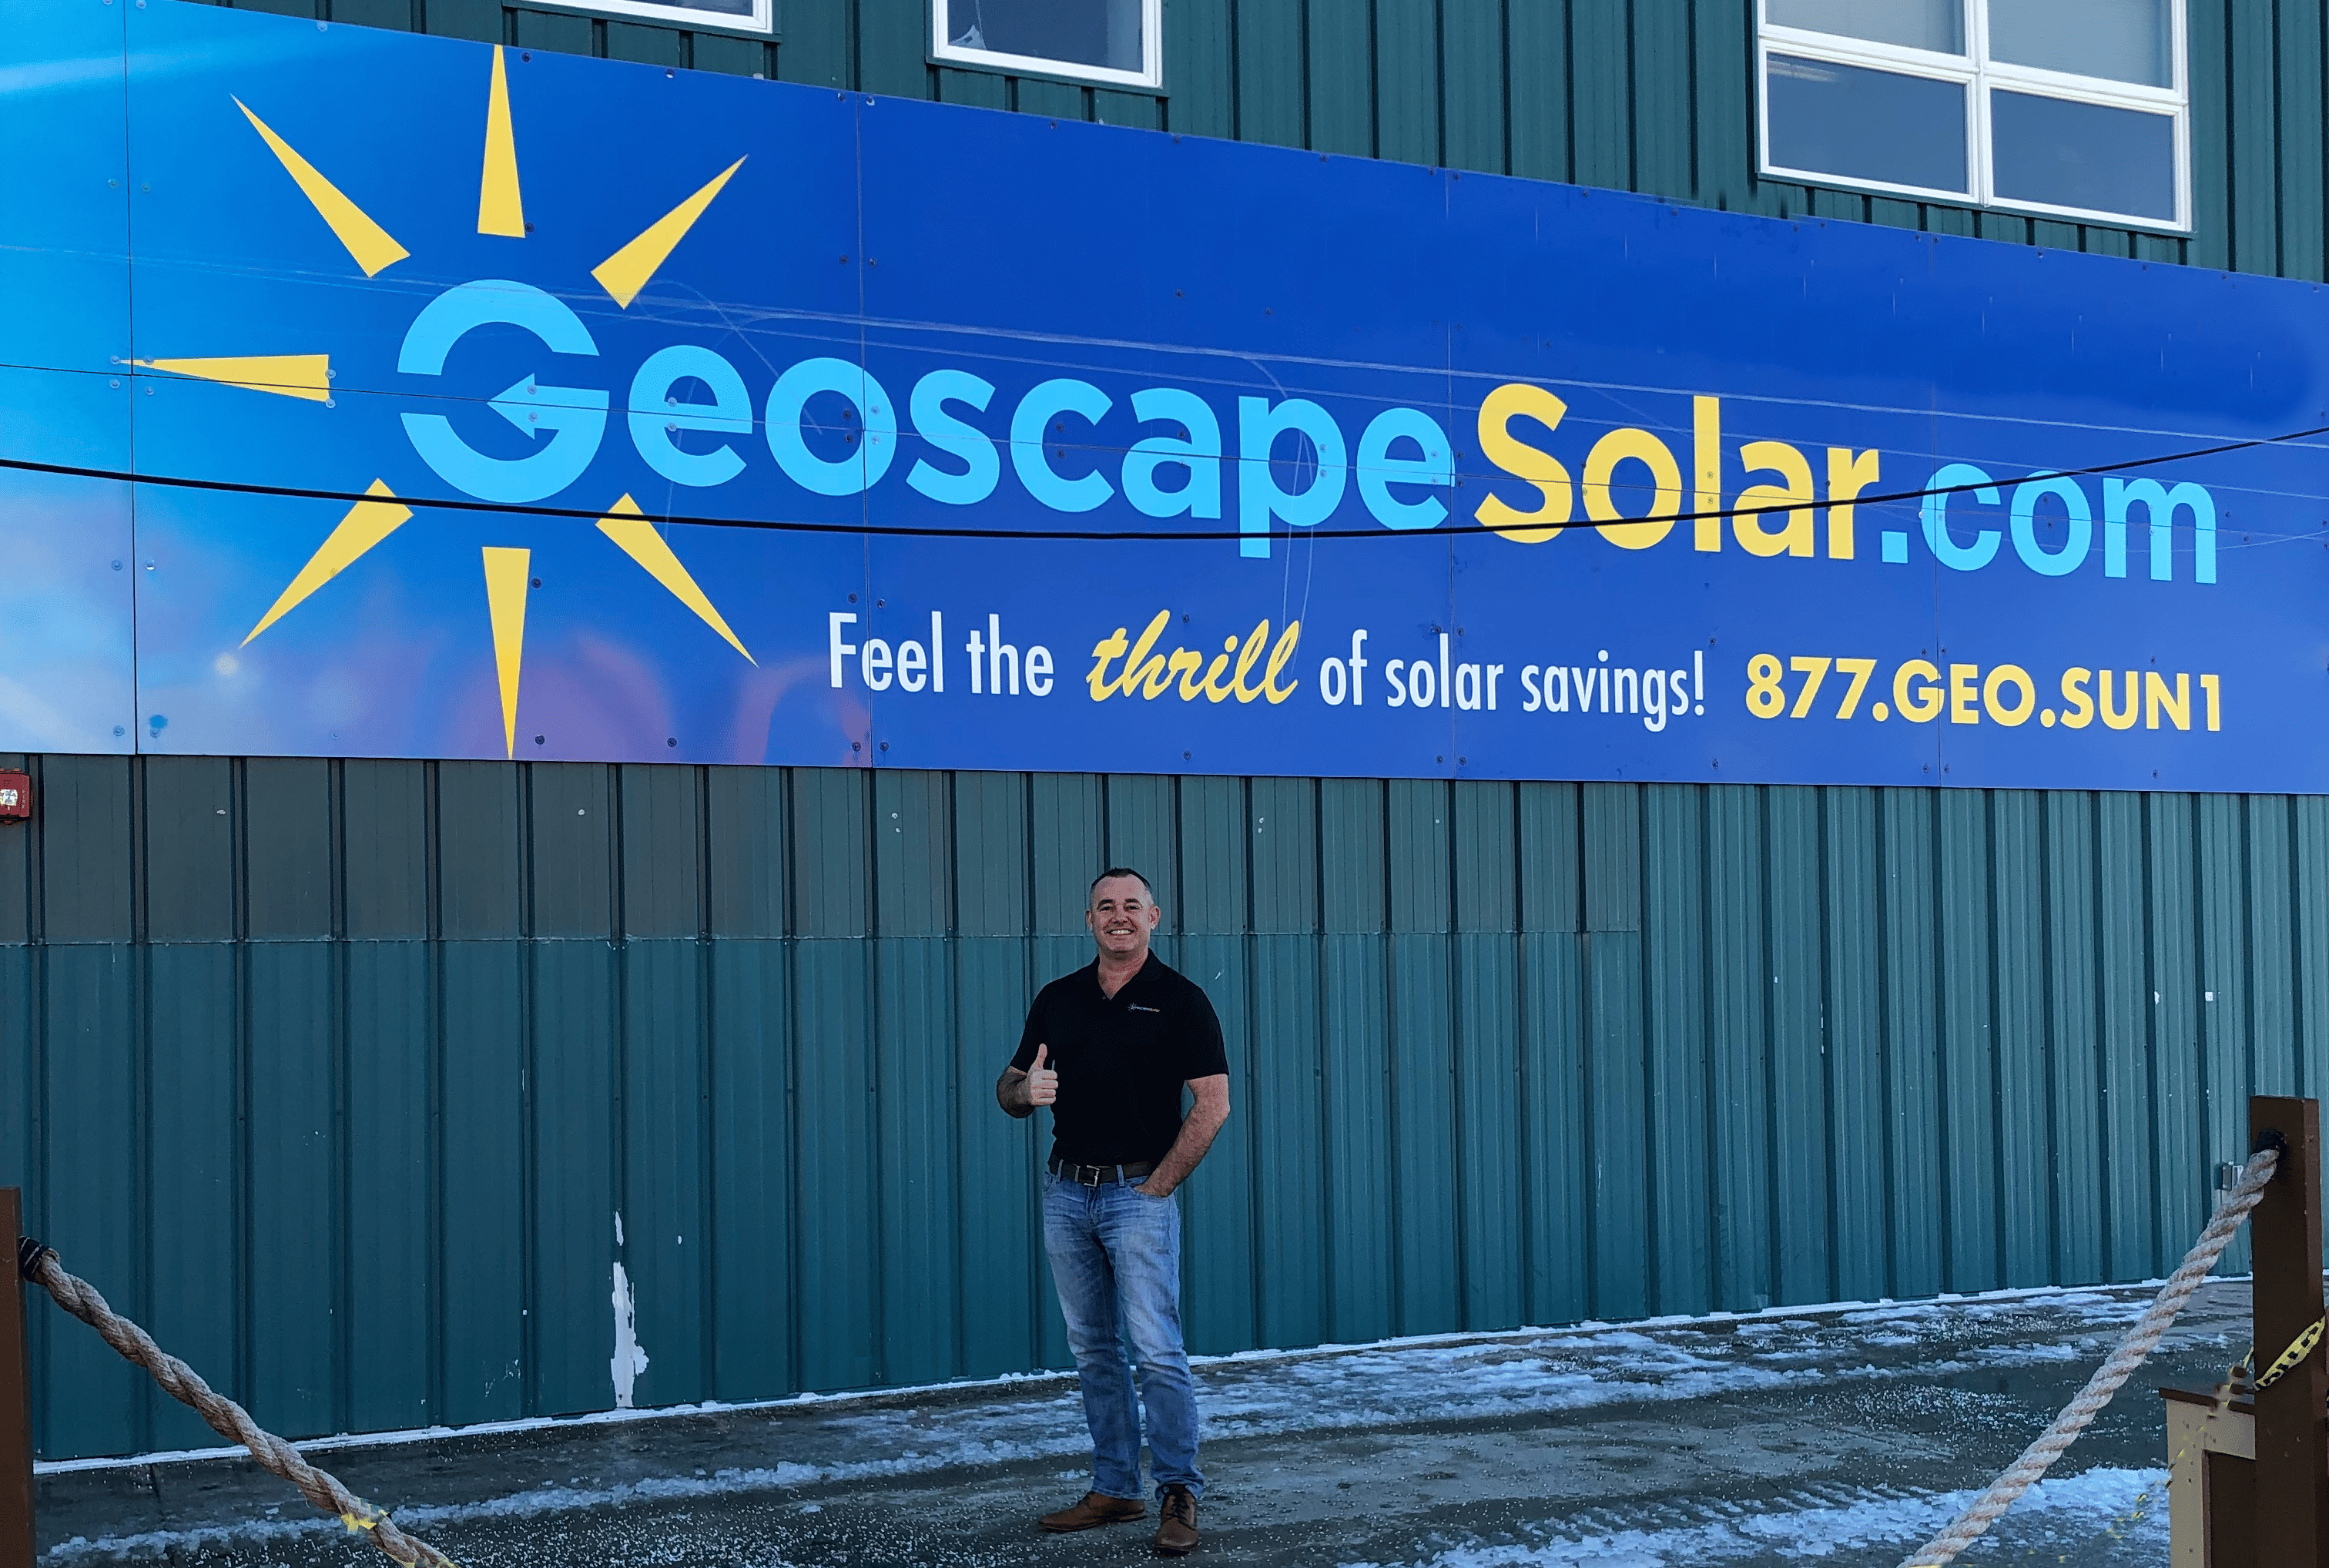 Geoscape Solar's Lee Watson named a Top Influential Chief Marketing Officer in Renewable Energy